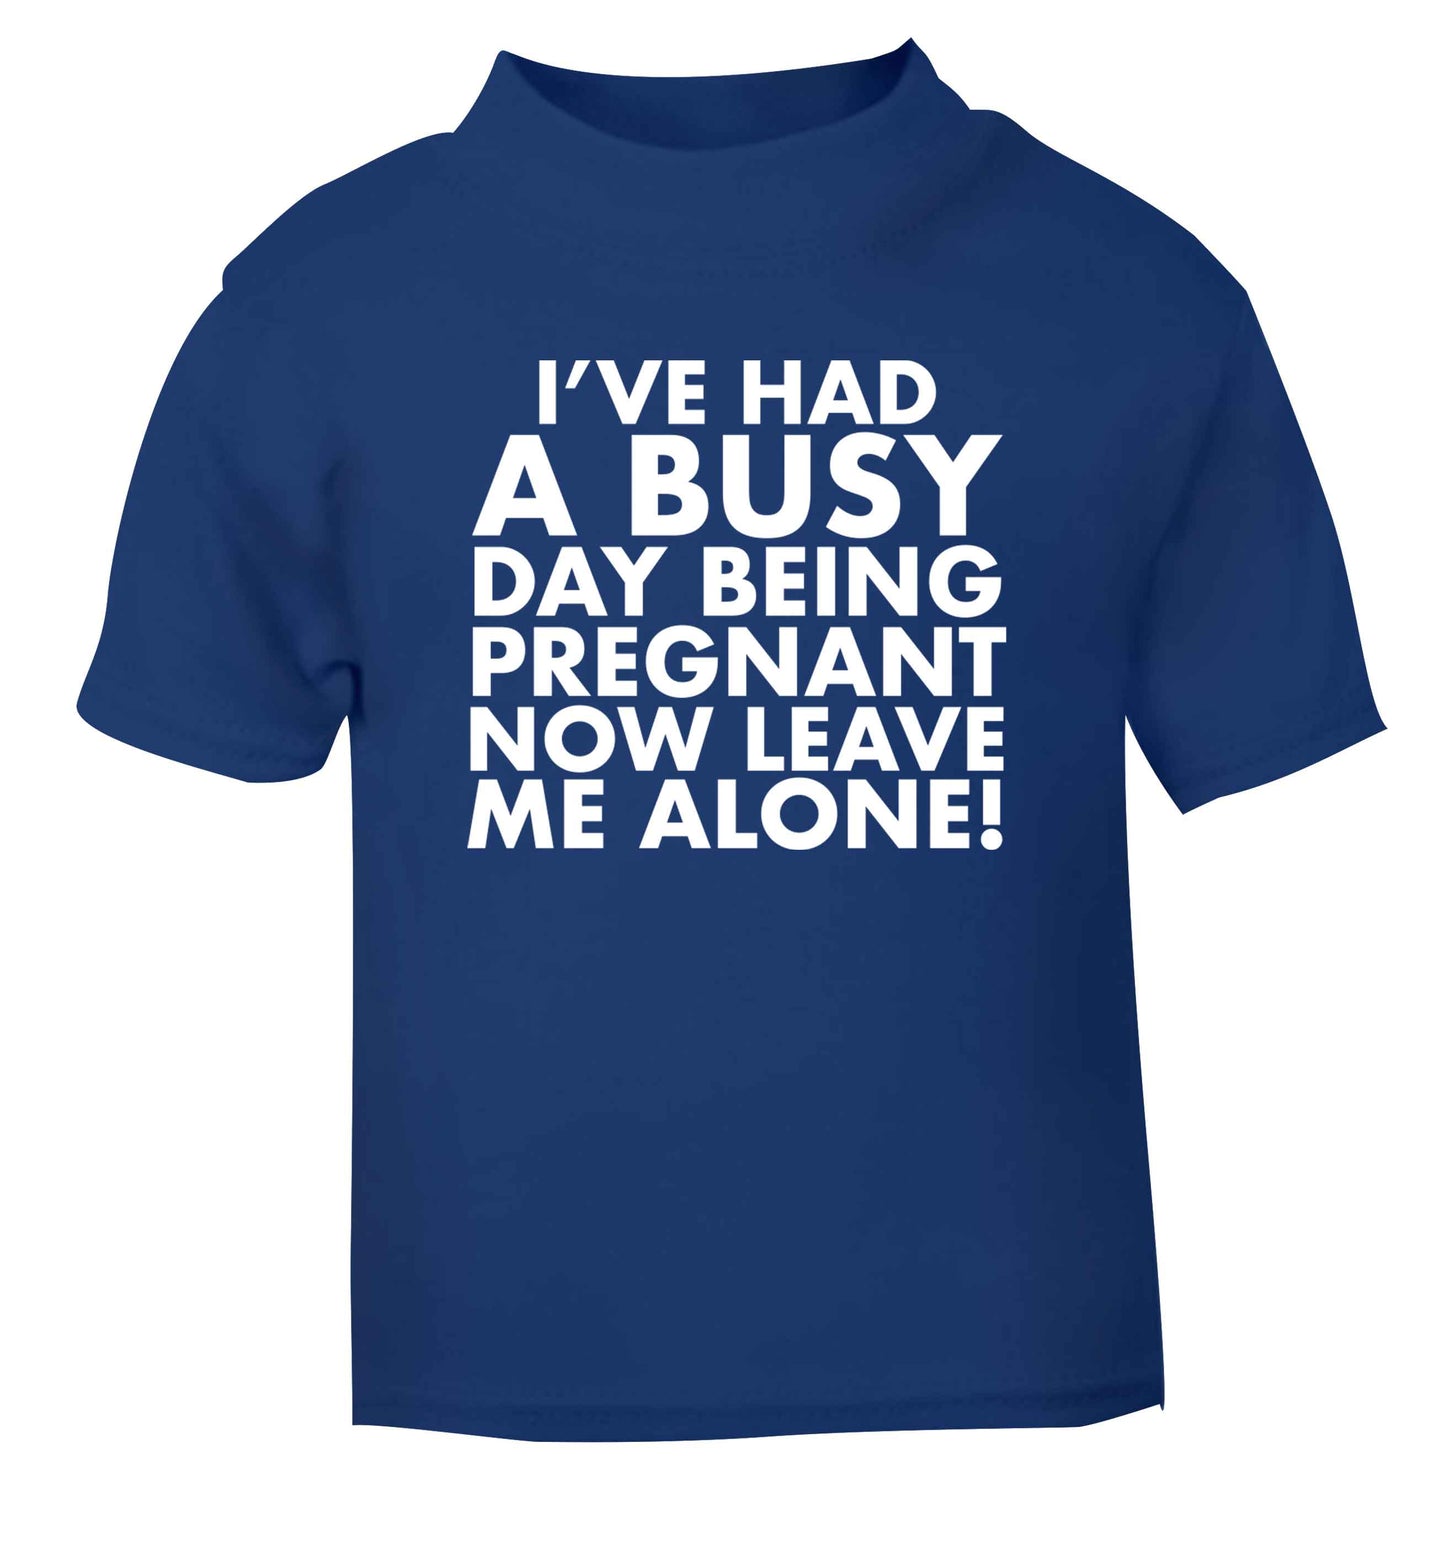 I've had a busy day being pregnant now leave me alone blue Baby Toddler Tshirt 2 Years